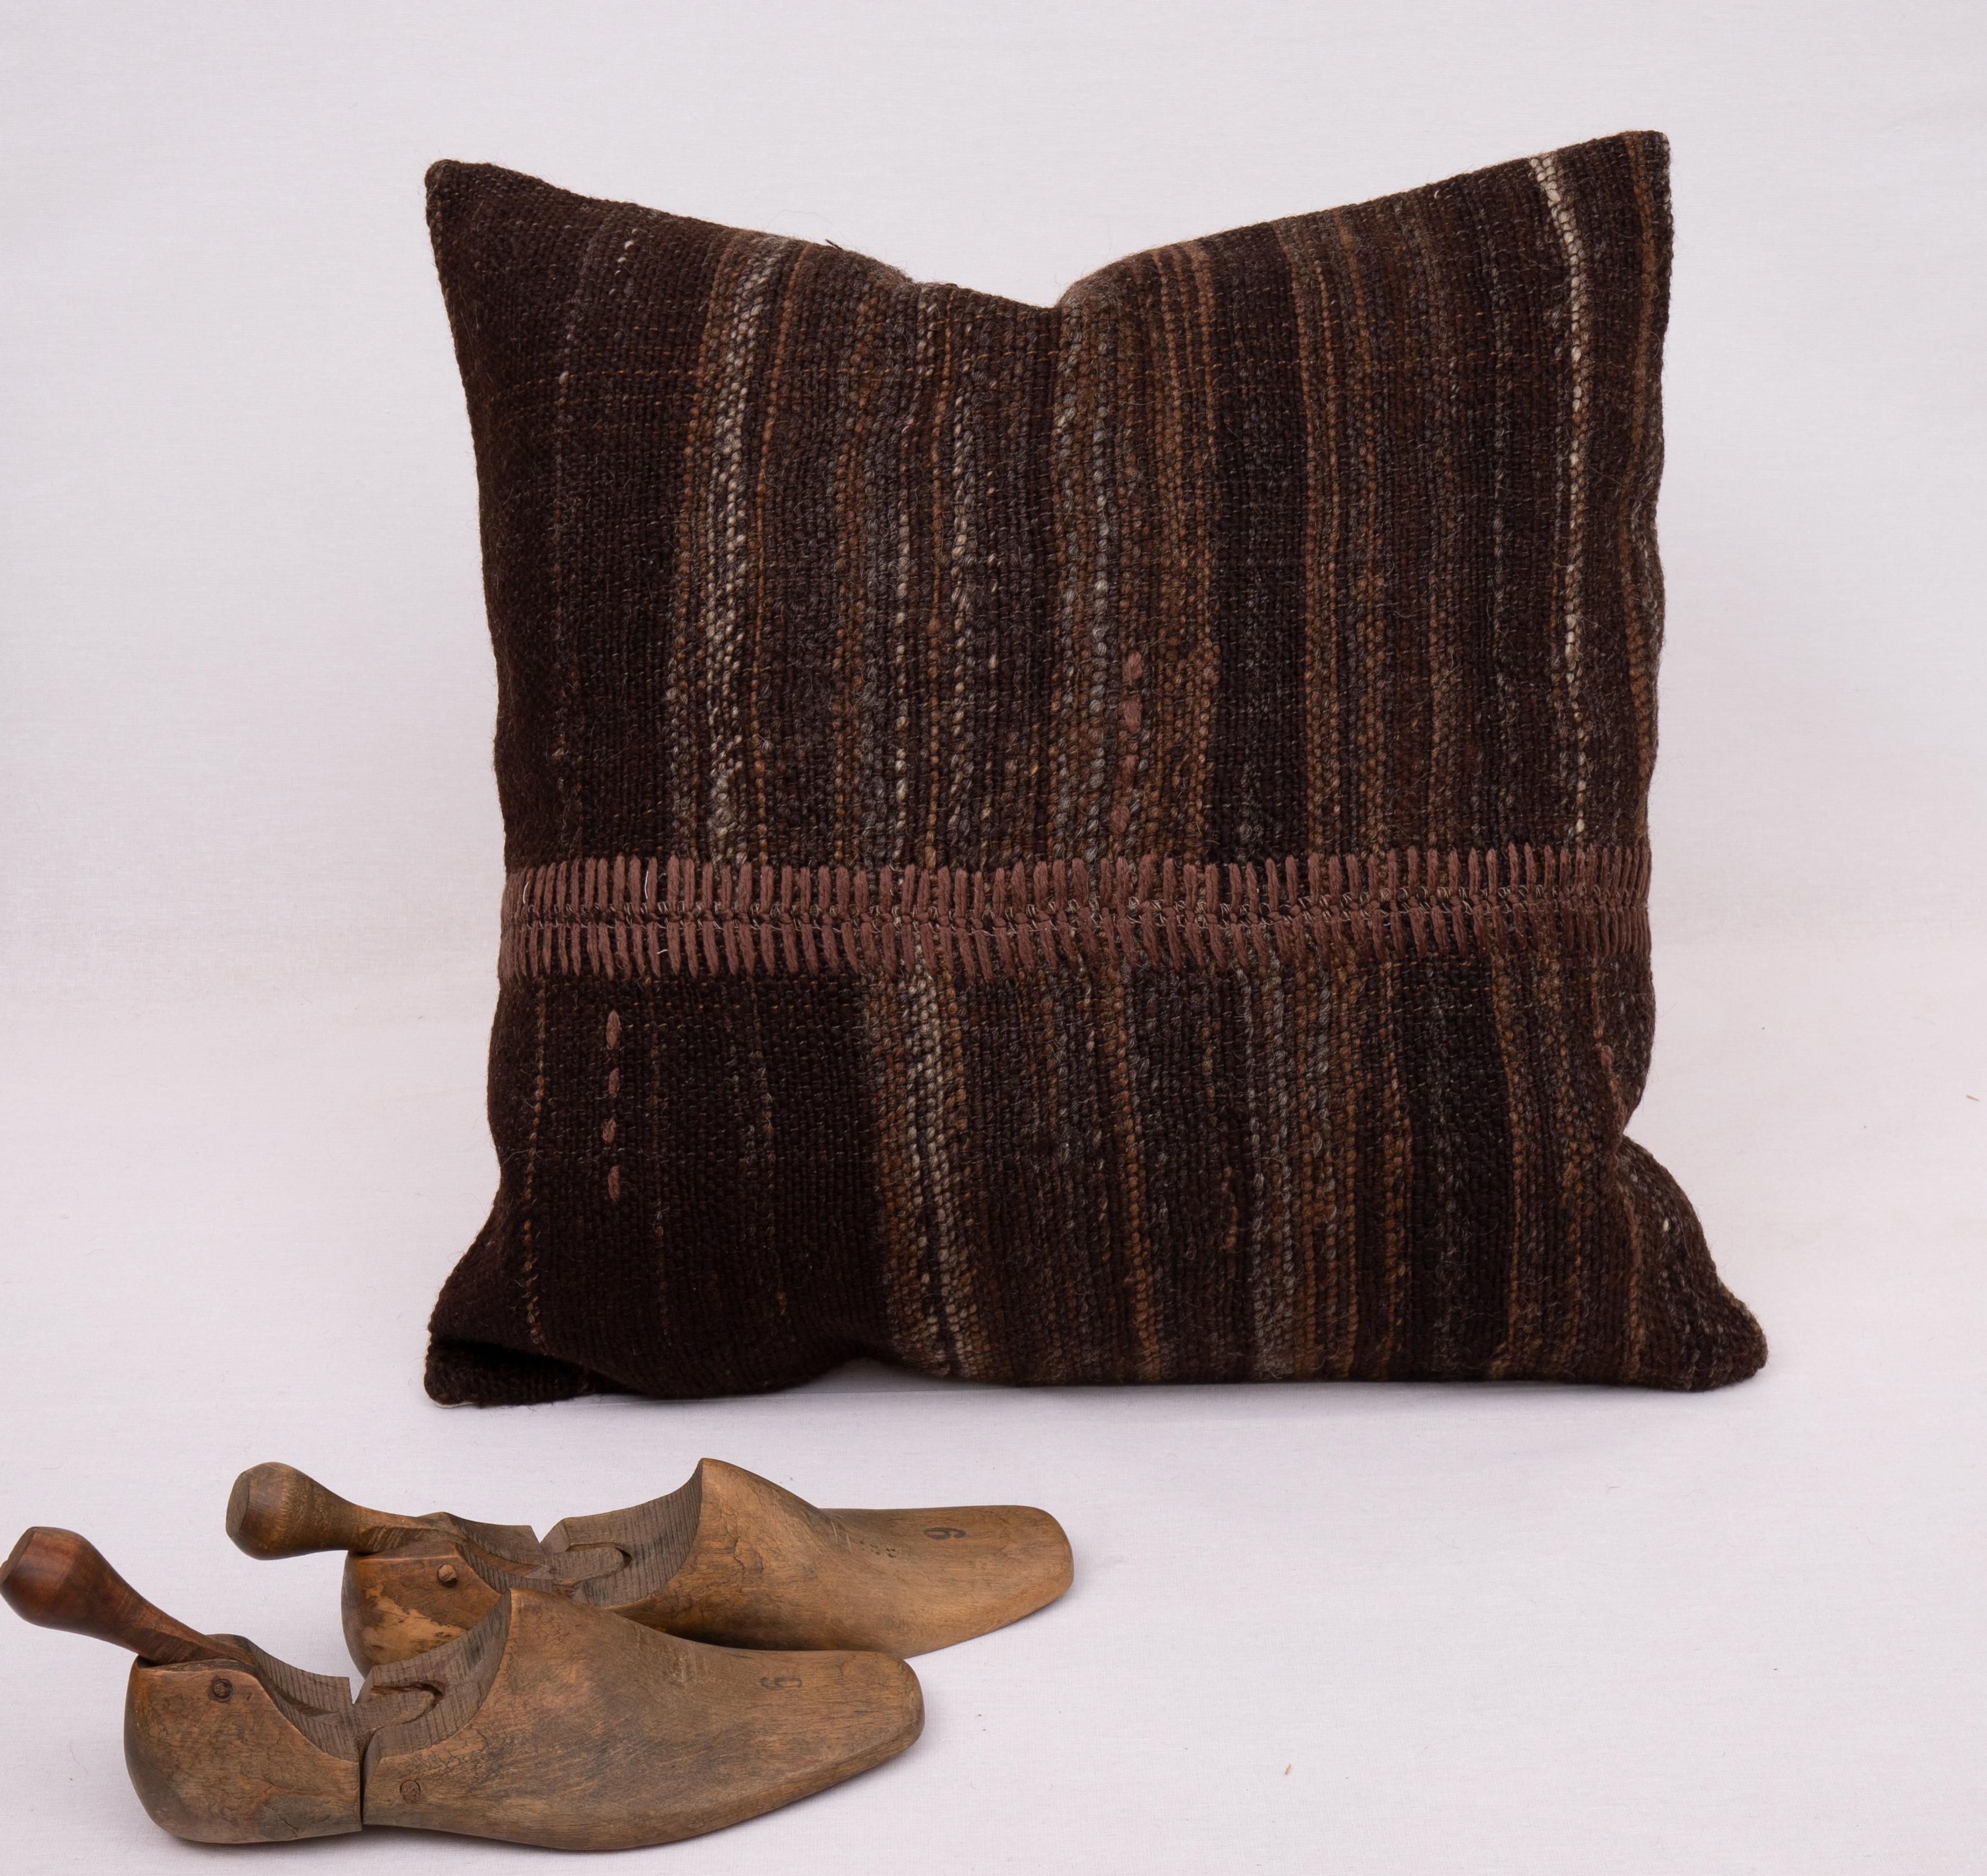 Kilim Rustic Pillow Case Made from a Vintage Un-Dyed Wool Coverlet, Mid-20th C